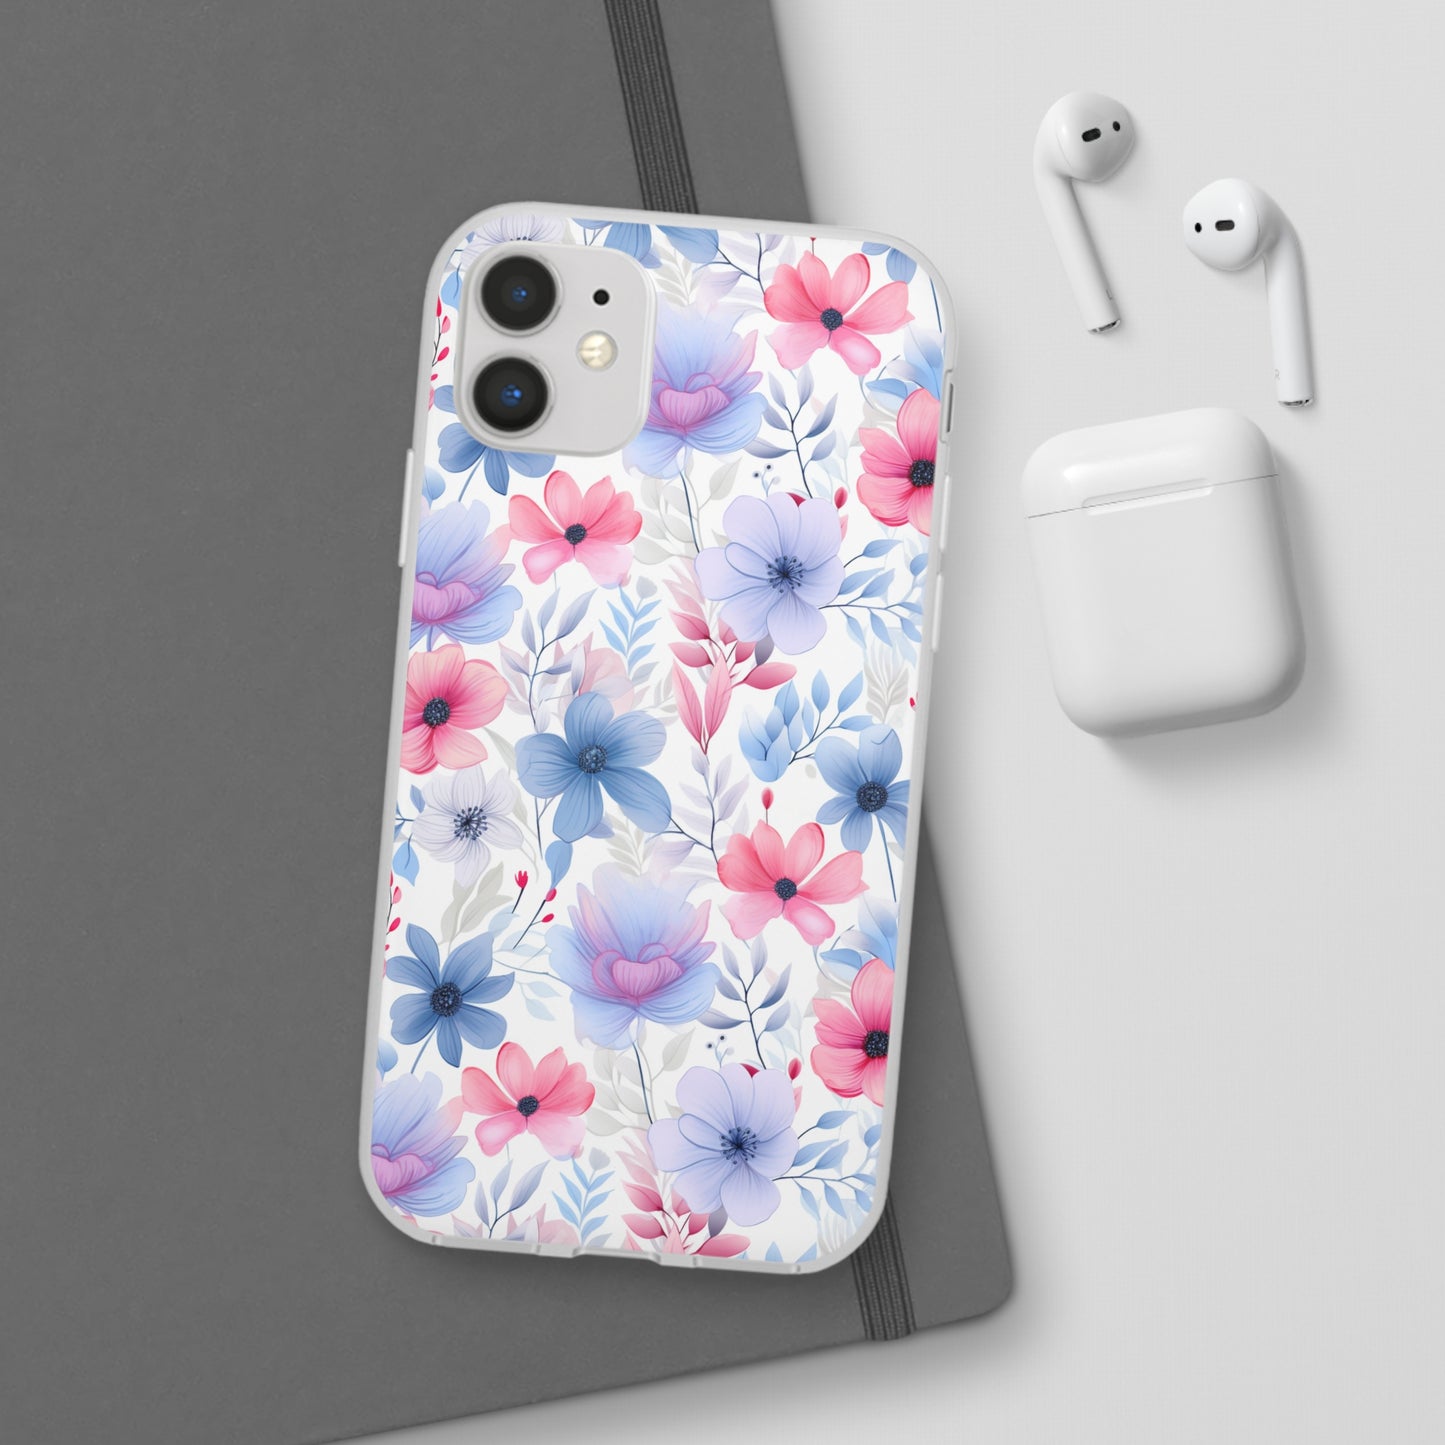 Floral Whispers - Soft Hues of Violets, Pinks, and Blues - Flexi Phone Case Phone Case Pattern Symphony iPhone 11 with gift packaging  